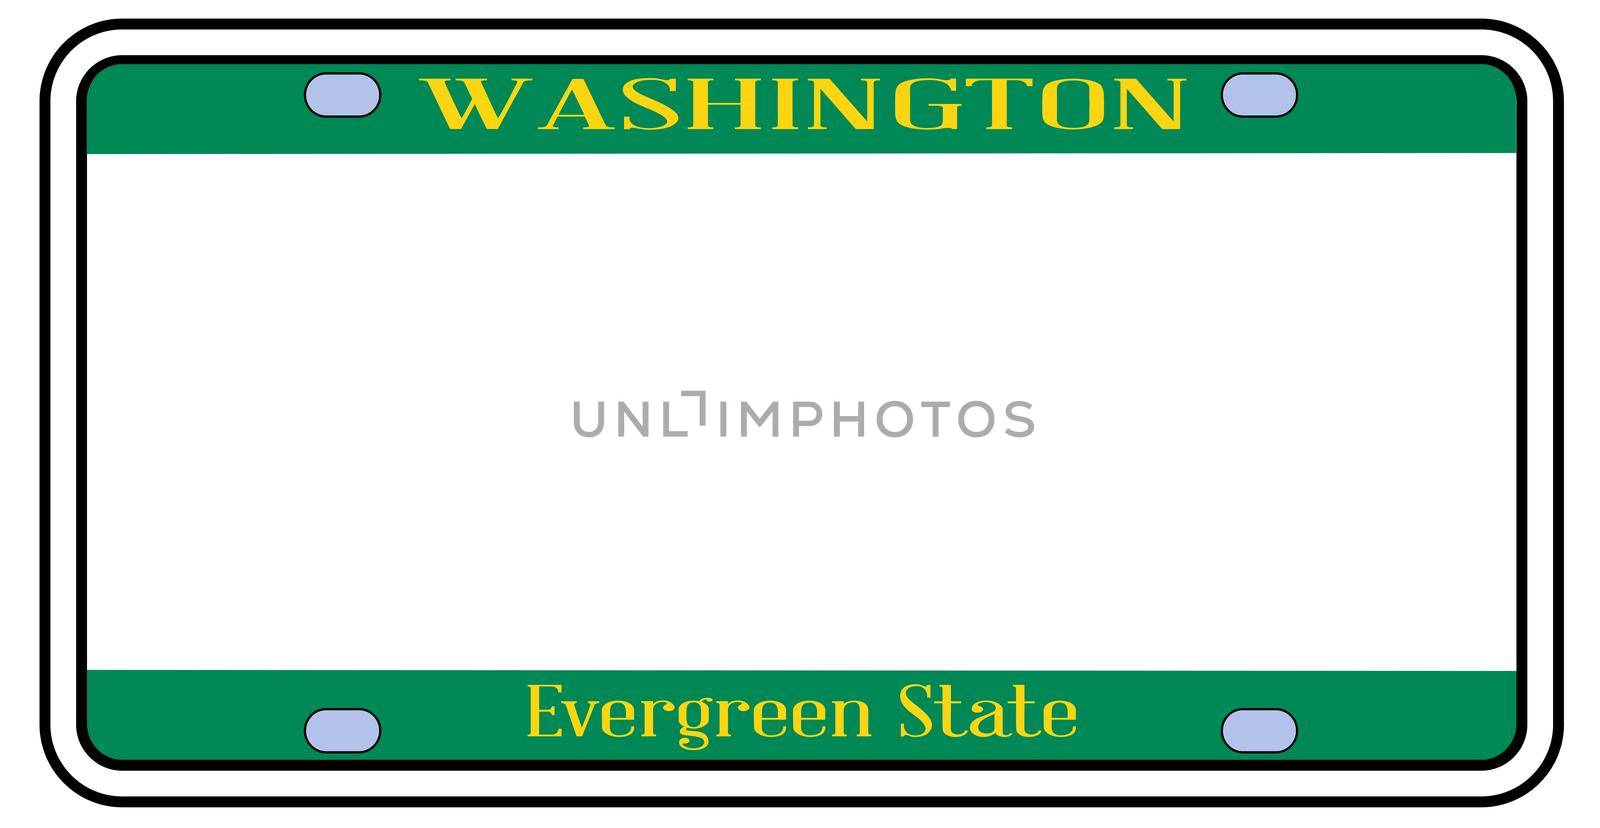 Blank Washington state license plate in the colors of the state flag over a white background